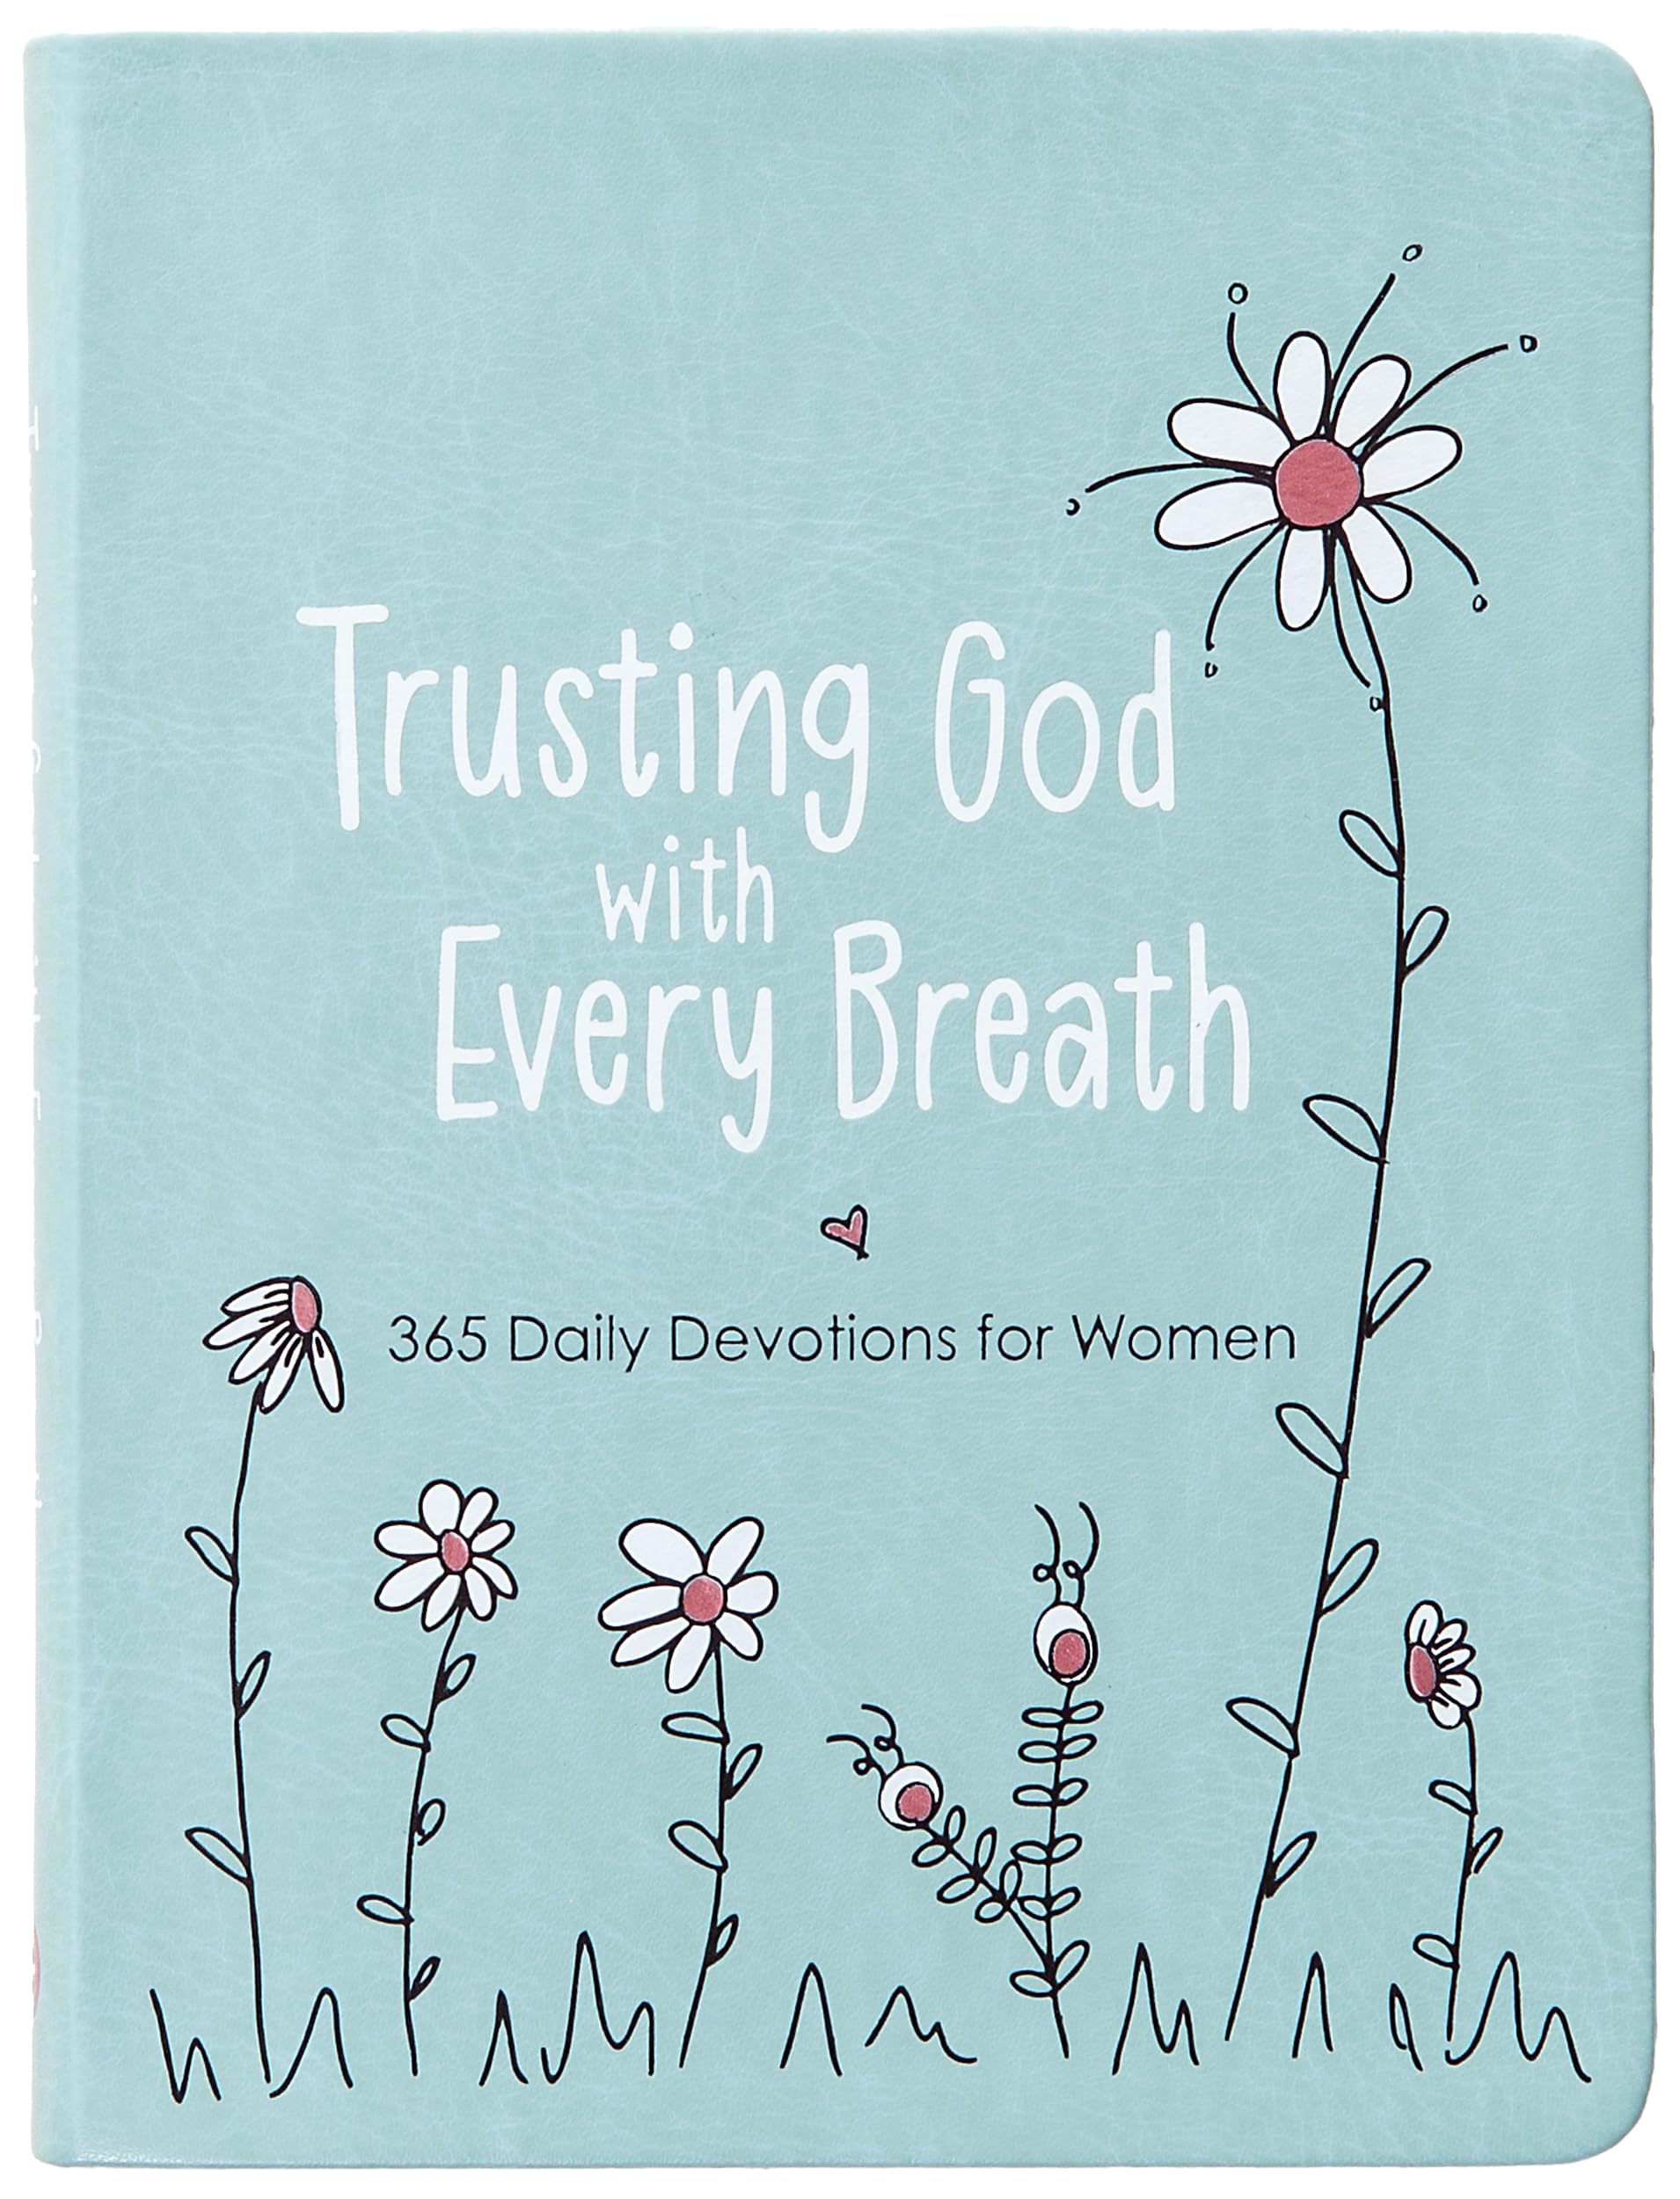 Trusting God with Every Breath: 365 Daily Devotions for Women by Mecham, Amy